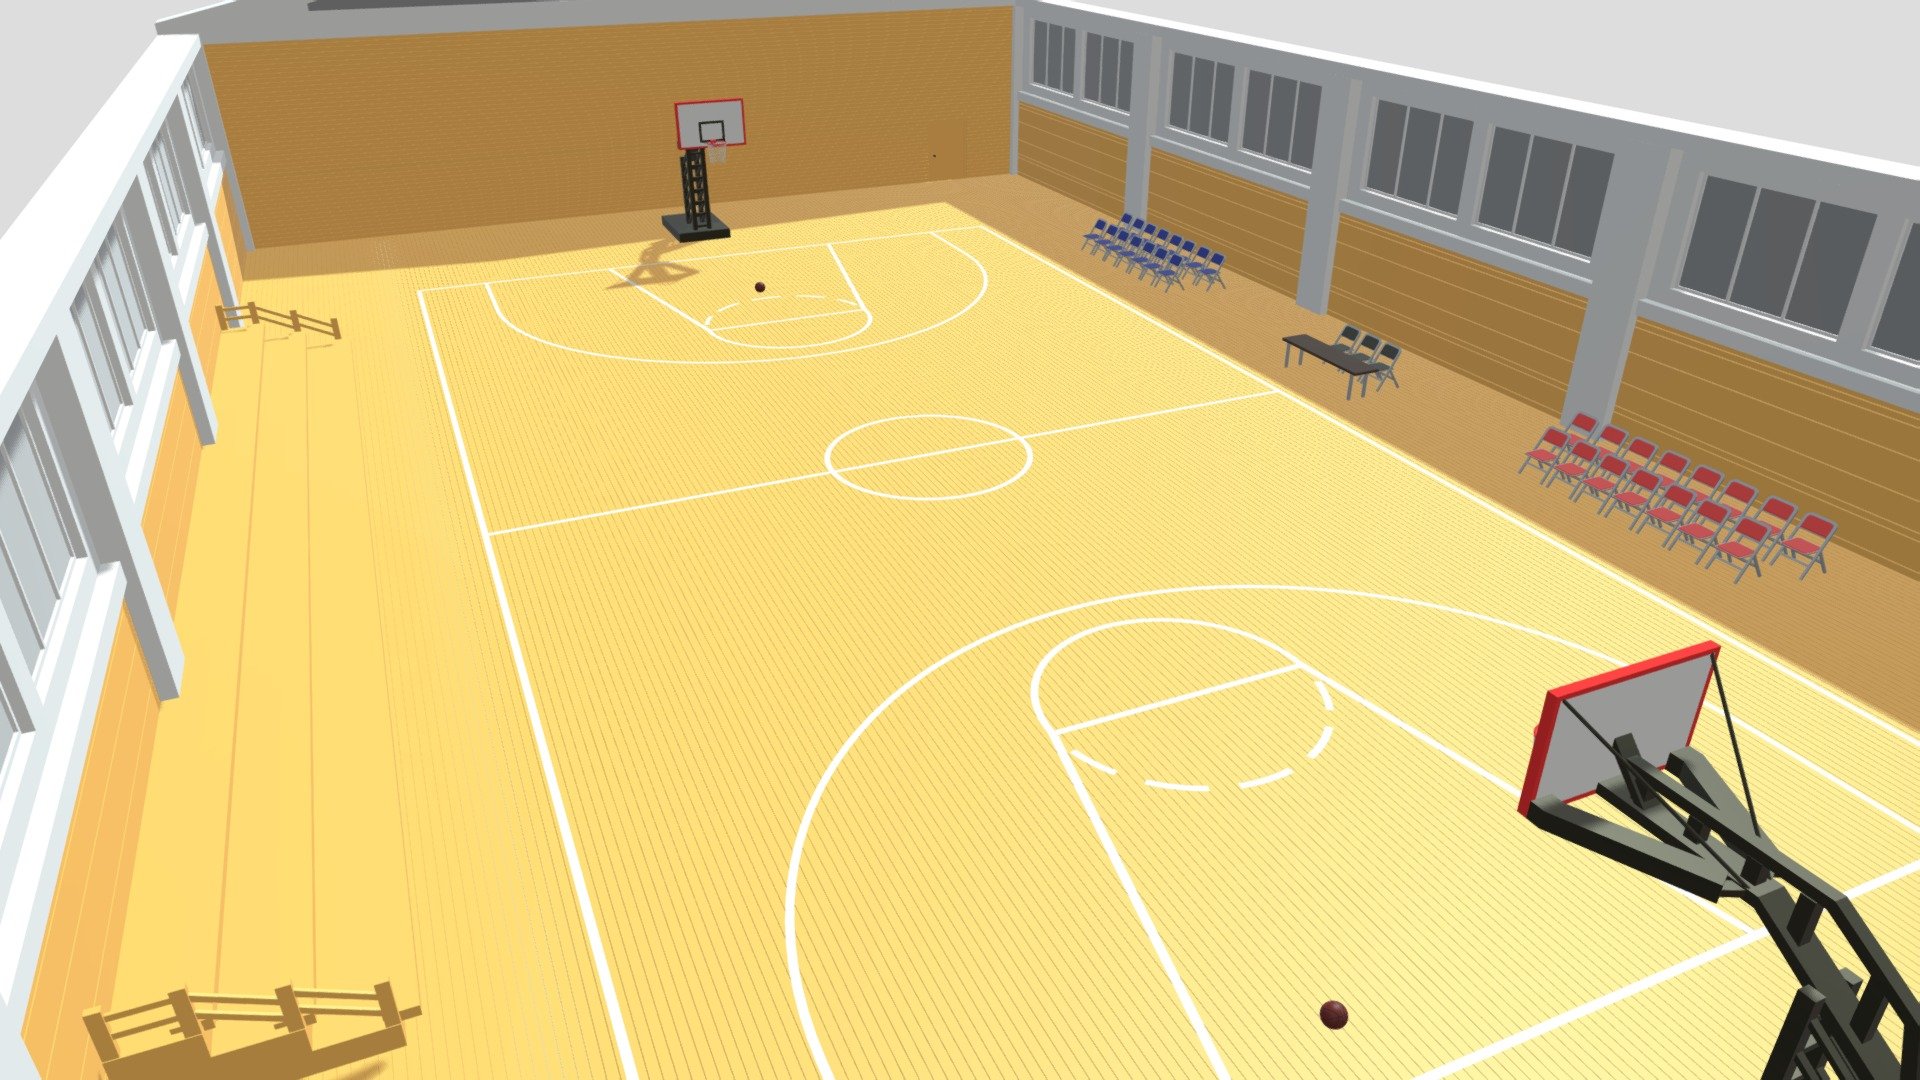 -Cartoon Basketball Gym.

-186 Objects.

-Vert : 26,139, Poly : 35,538.

-This product was created in Blender 2.8.

-Formats: blend, fbx, obj, c4d, dae, abc, stl, glb, c4d, unitypackage.

-We hope you enjoy this model.

-Thank you 3d model